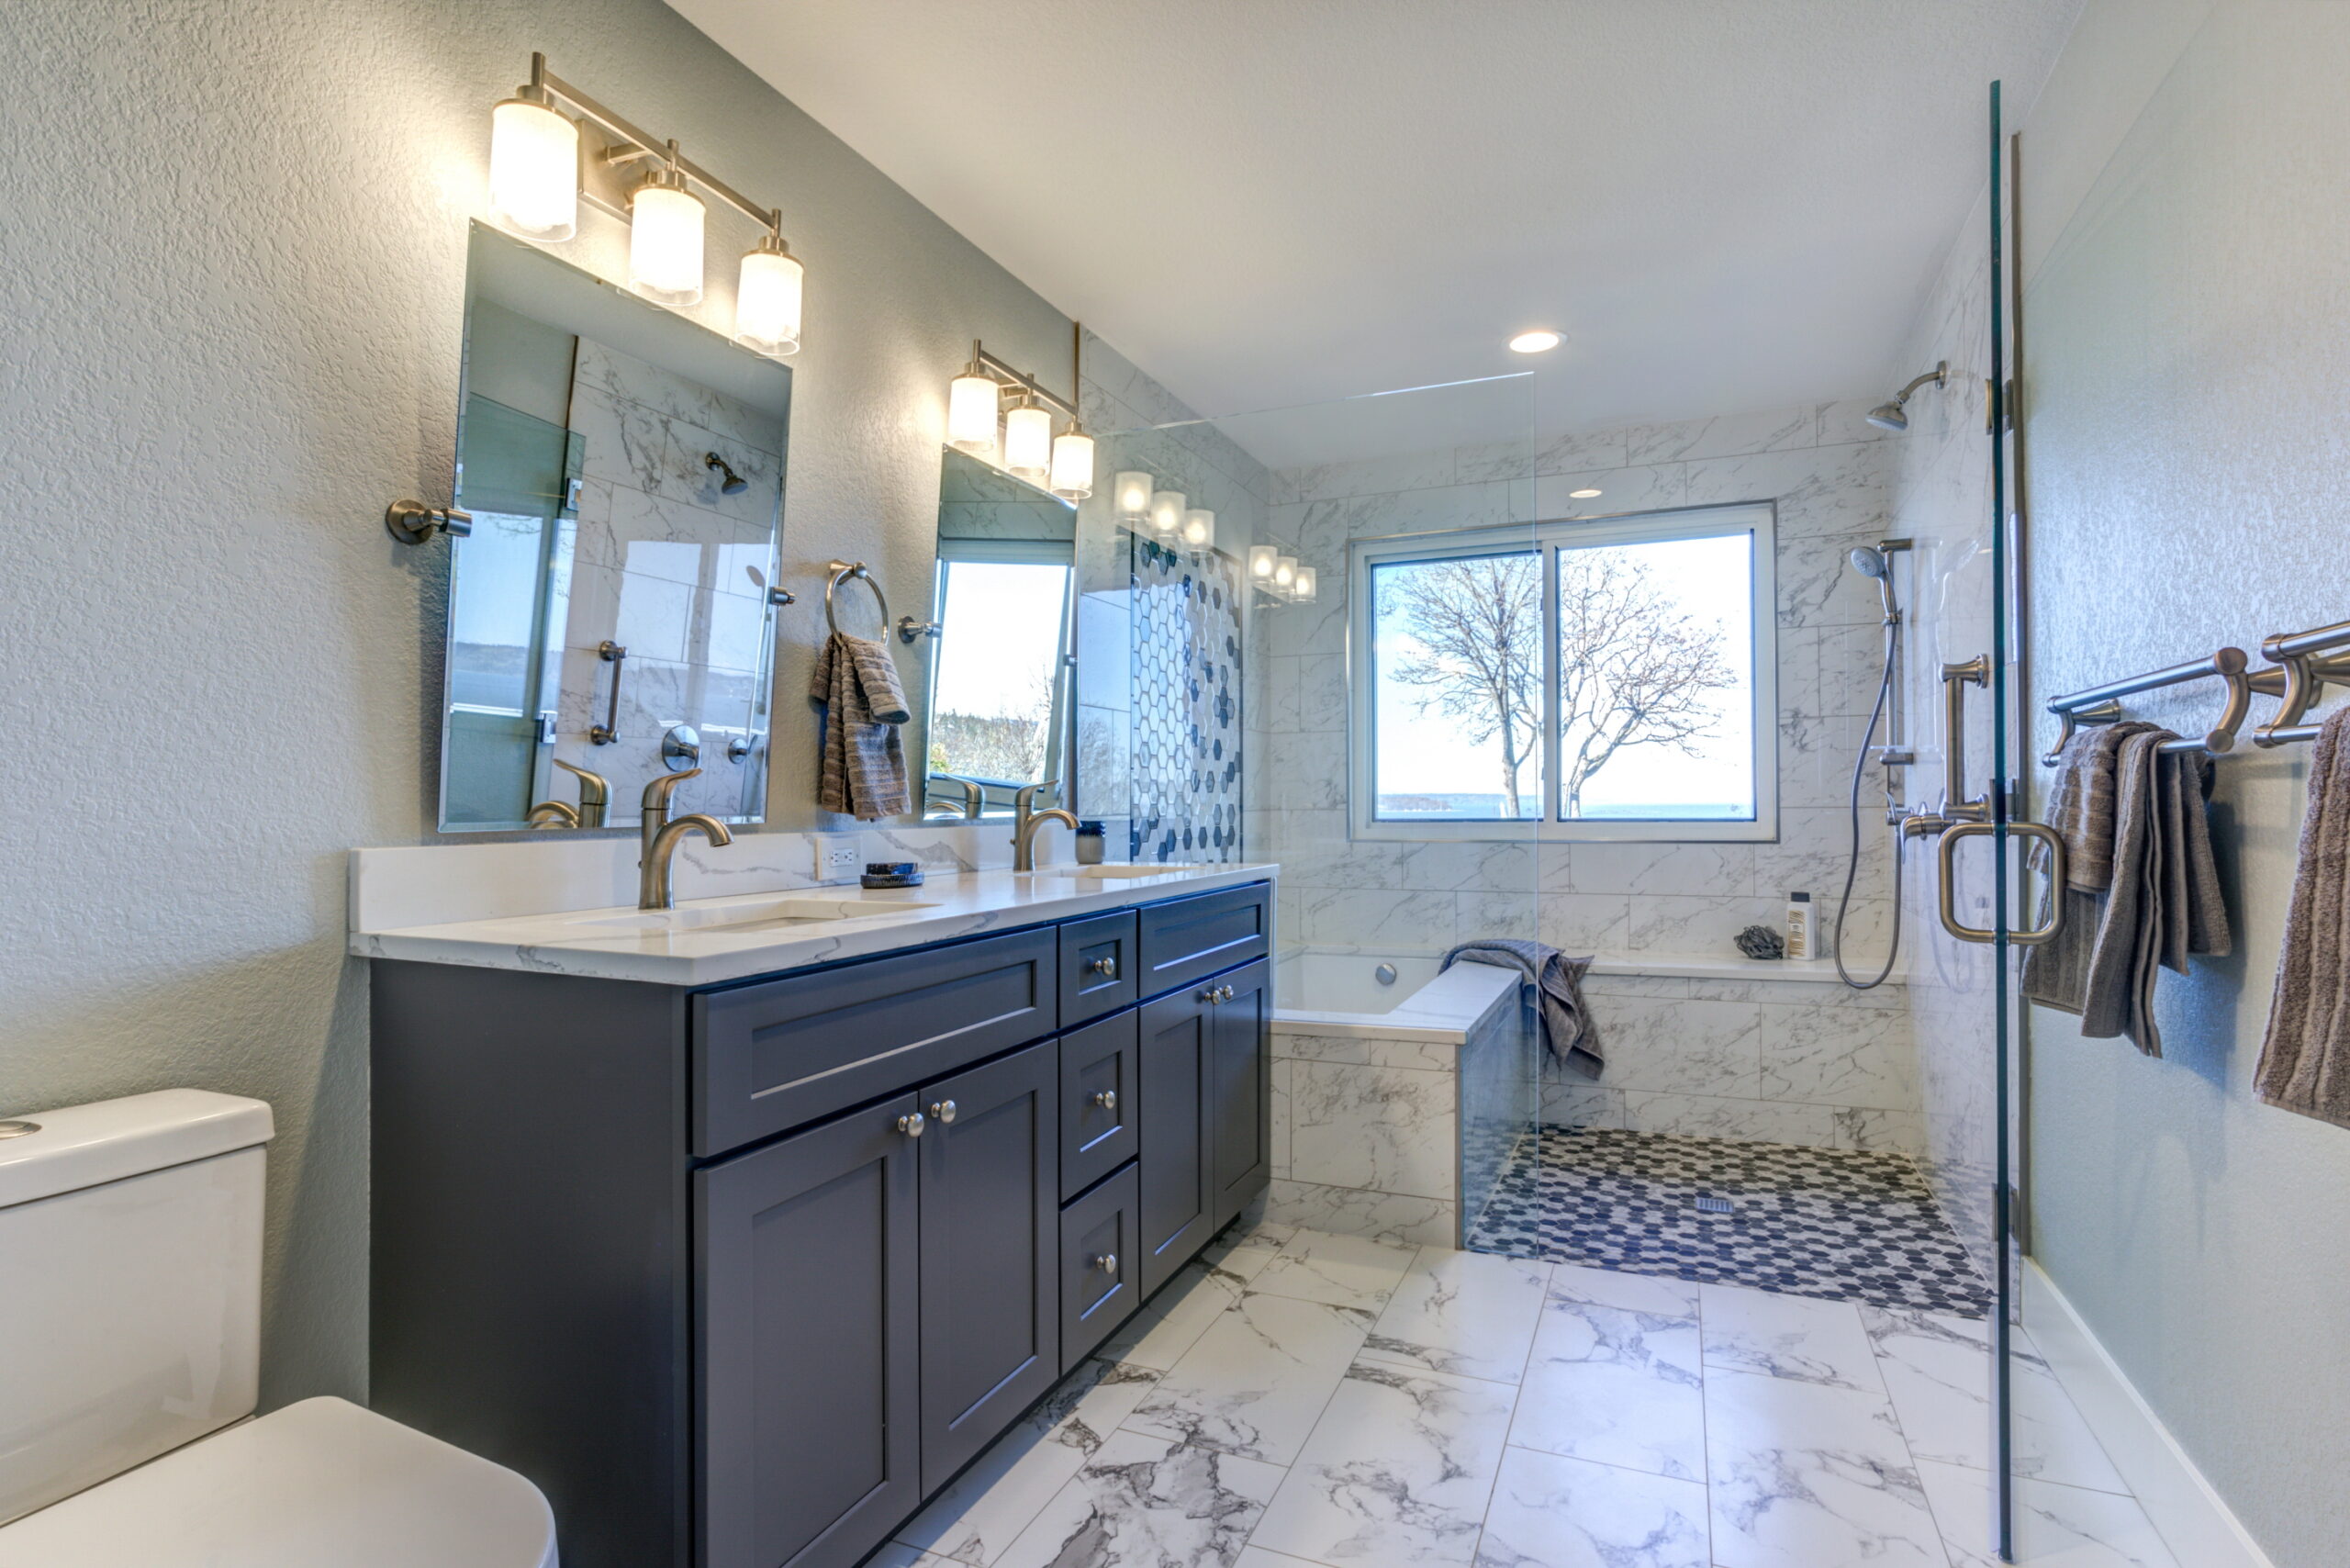 Maximize functionality with sleek, frameless shared mirrors for a modern bathroom.